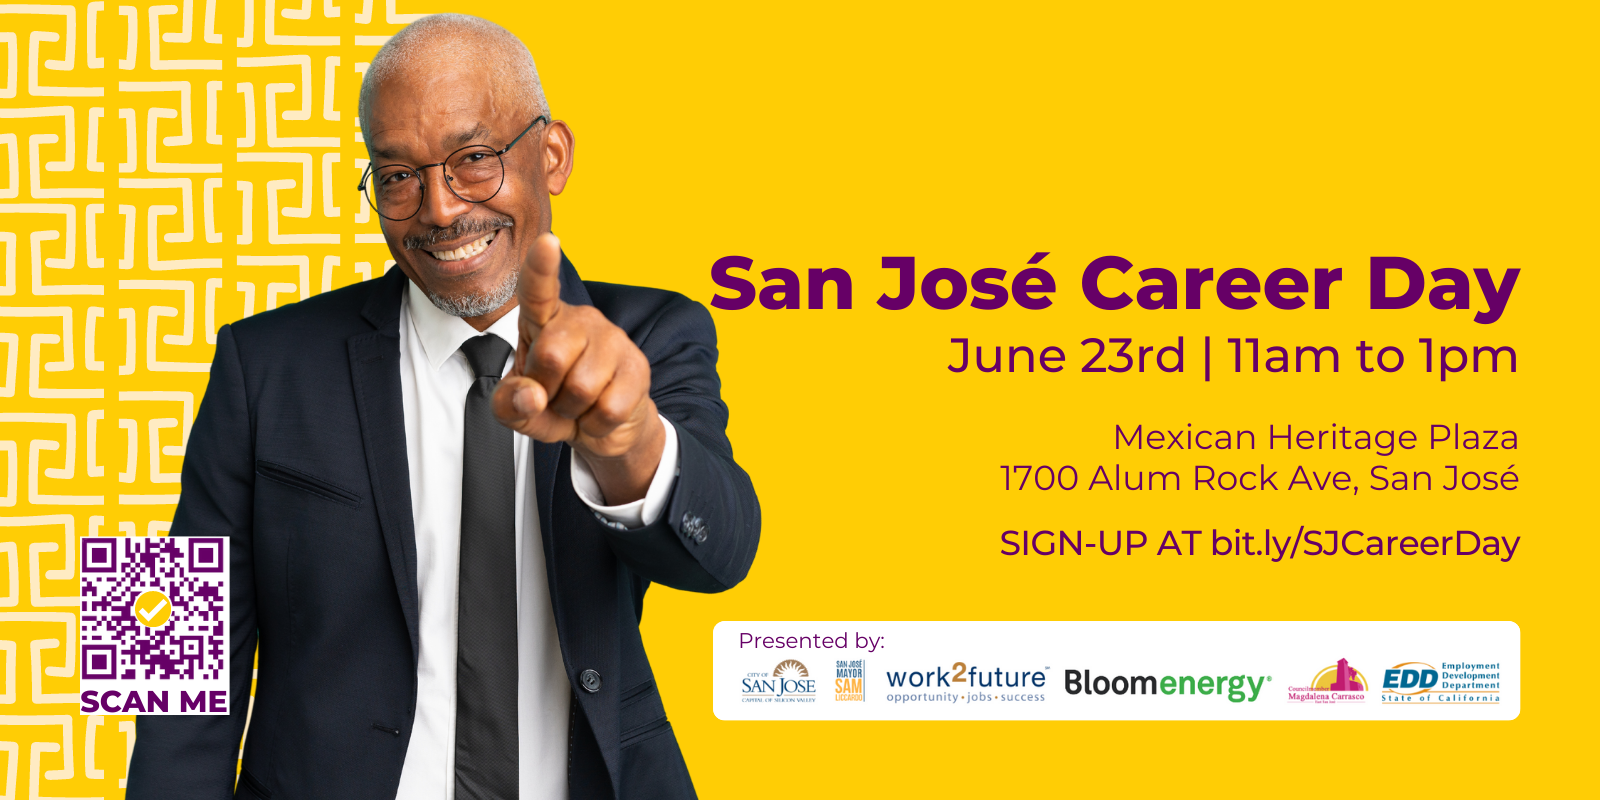 Ready for a career move? See you at the biggest San Jose #JobFair all year! 💼 20+ employers 🎓 No degree required 👩‍🏭 Variety of roles & industries ✅ Full-time employment Hosted by @CityofSanJose, @Bloom_Energy, @work2future. Sign-up: https://bit.ly/SJCareerDay